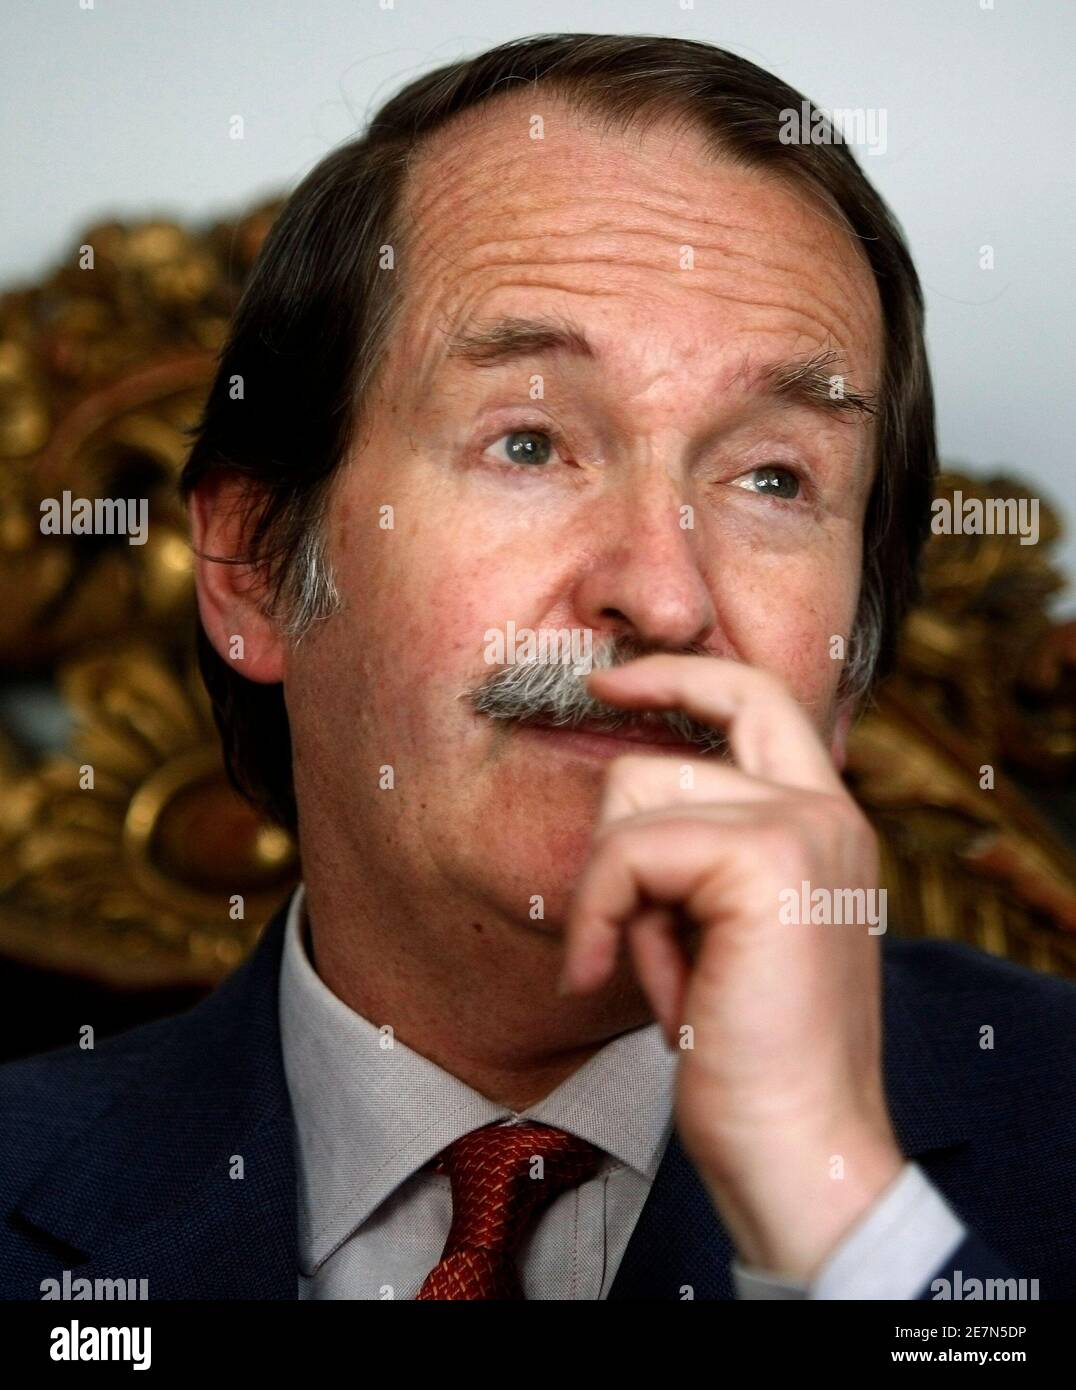 Dom Duarte, the Duke of Braganza, talks during an interview with Reuters in Lisbon in this June 15, 2007 file photo. Duarte, a relic of the Portuguese aristocracy, may not enjoy the riches or influence of the former kings of Portugal, but he'd be happy to take the throne if it was on offer. Although Portugal has been a republic since 1910, Duarte told Reuters he'd like to see a referendum on whether the constitution can be changed to bring back the monarchy and allow him to regain the family throne. To match LIFE-PORTUGAL/KING  REUTERS/Nacho Doce/Files  (PORTUGAL) Stock Photo